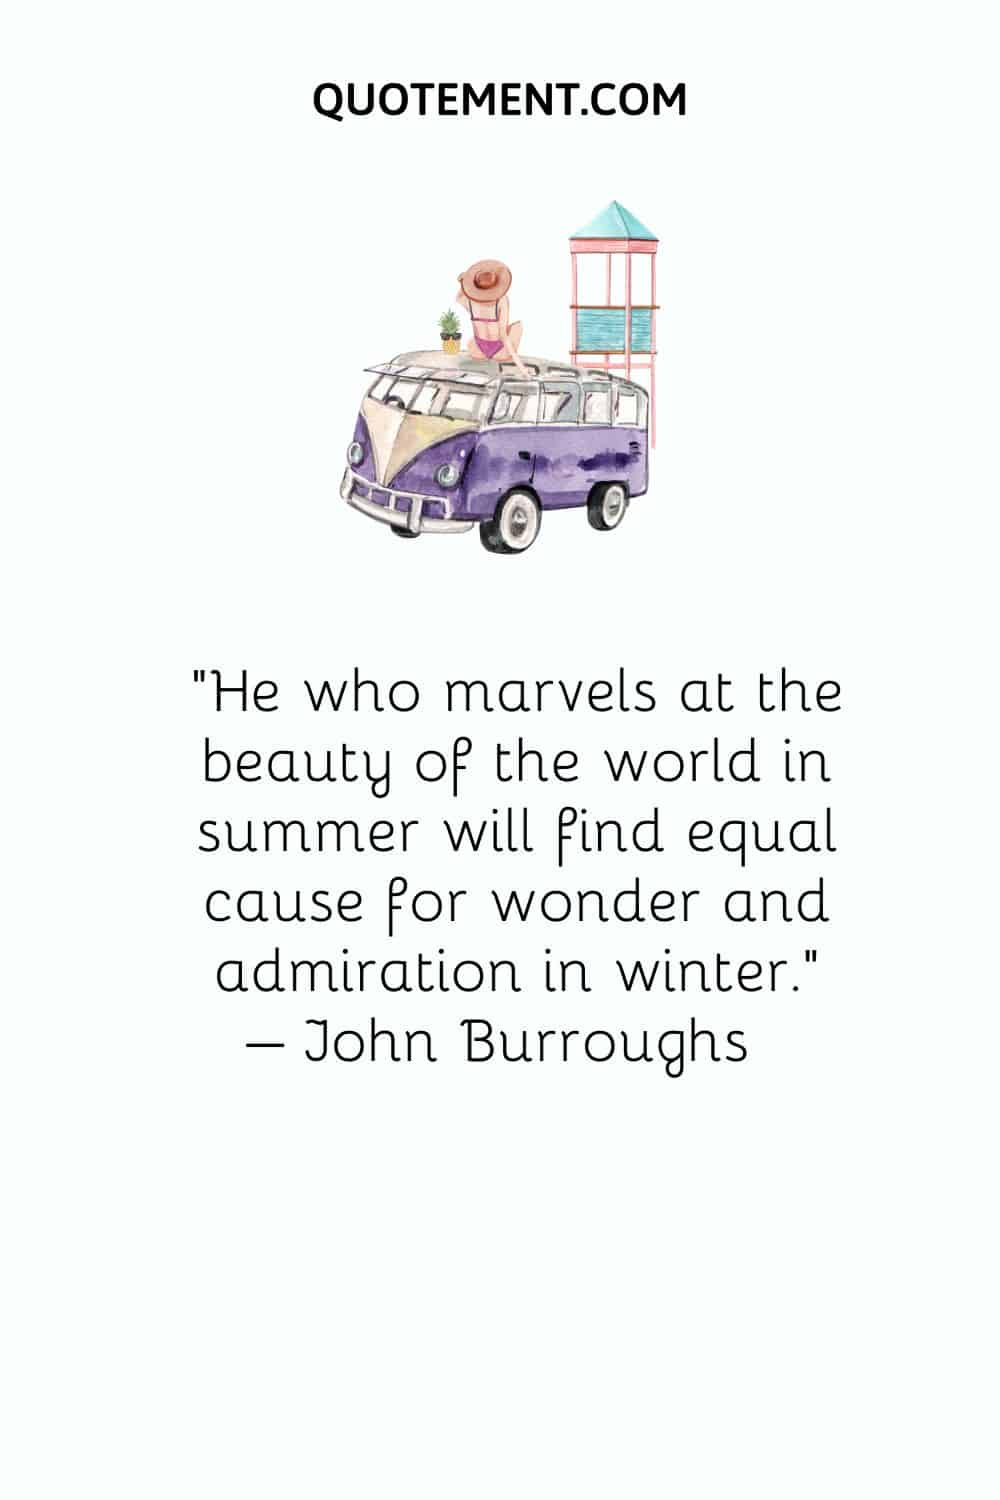 He who marvels at the beauty of the world in summer will find equal cause for wonder and admiration in winter. – John Burroughs